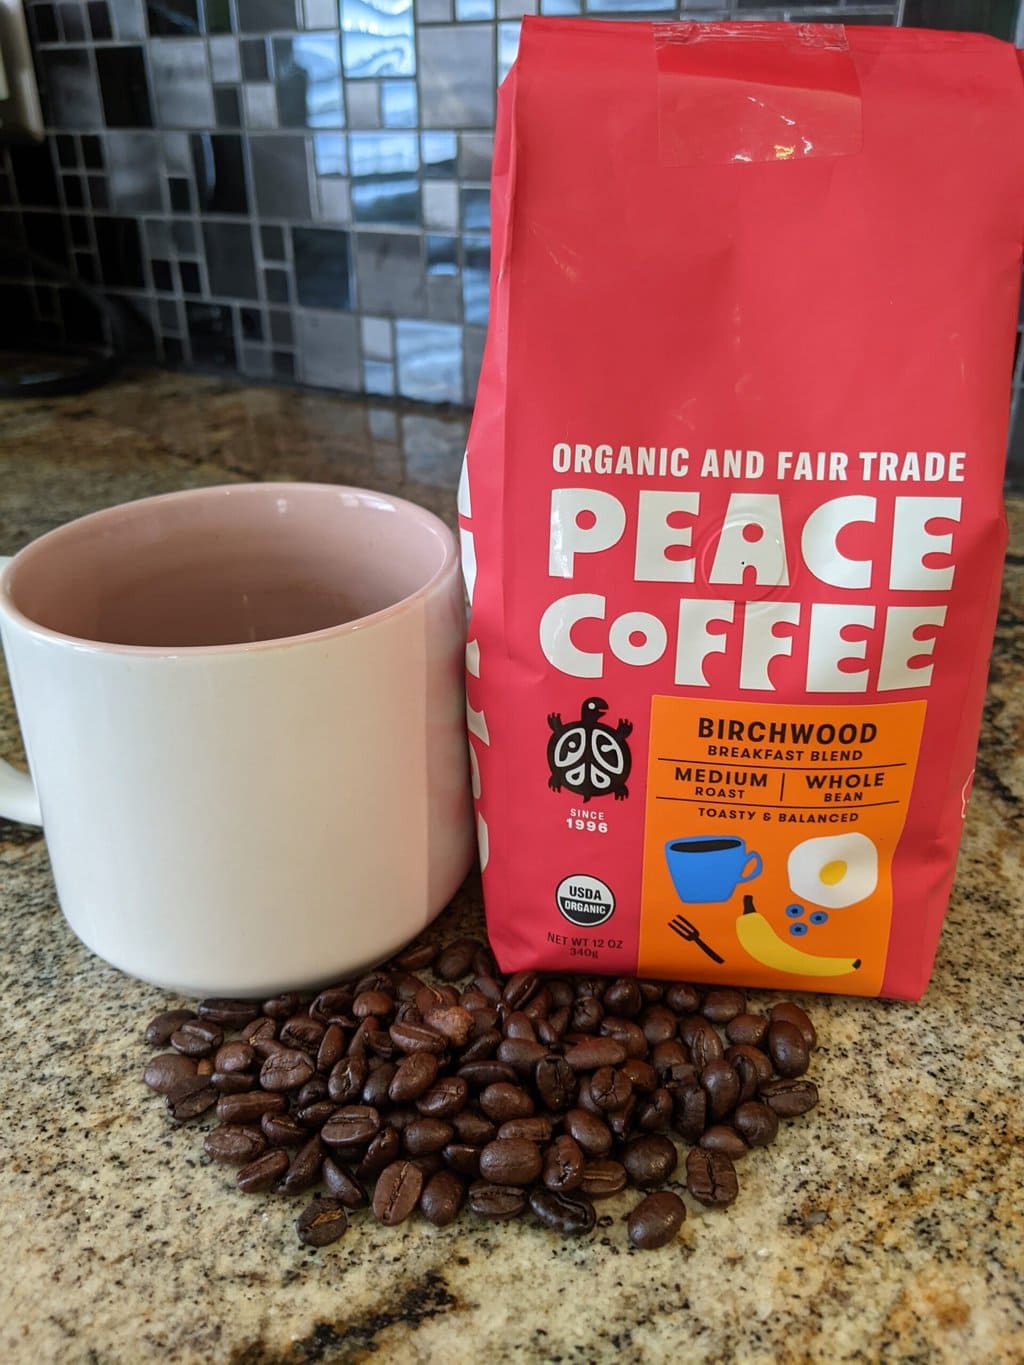 Peace Coffee Birchwood Breakfast Blend Medium Roast stands on the kitchen table next to a brewed cup of coffee and scattered coffee beans